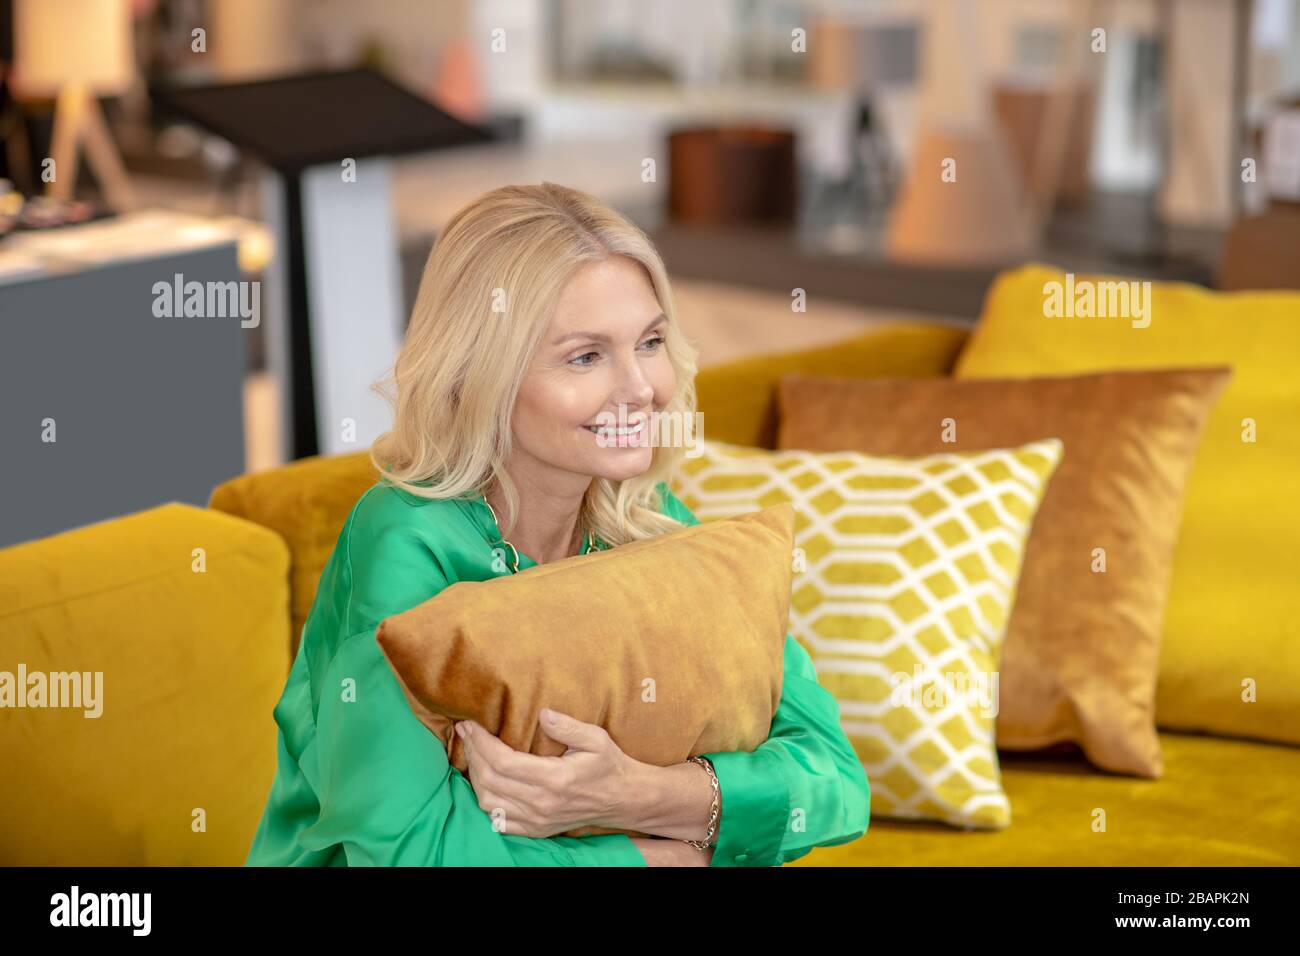 Good mood. Blonde woman in a green blouse huggoing the pillow and smiling Stock Photo